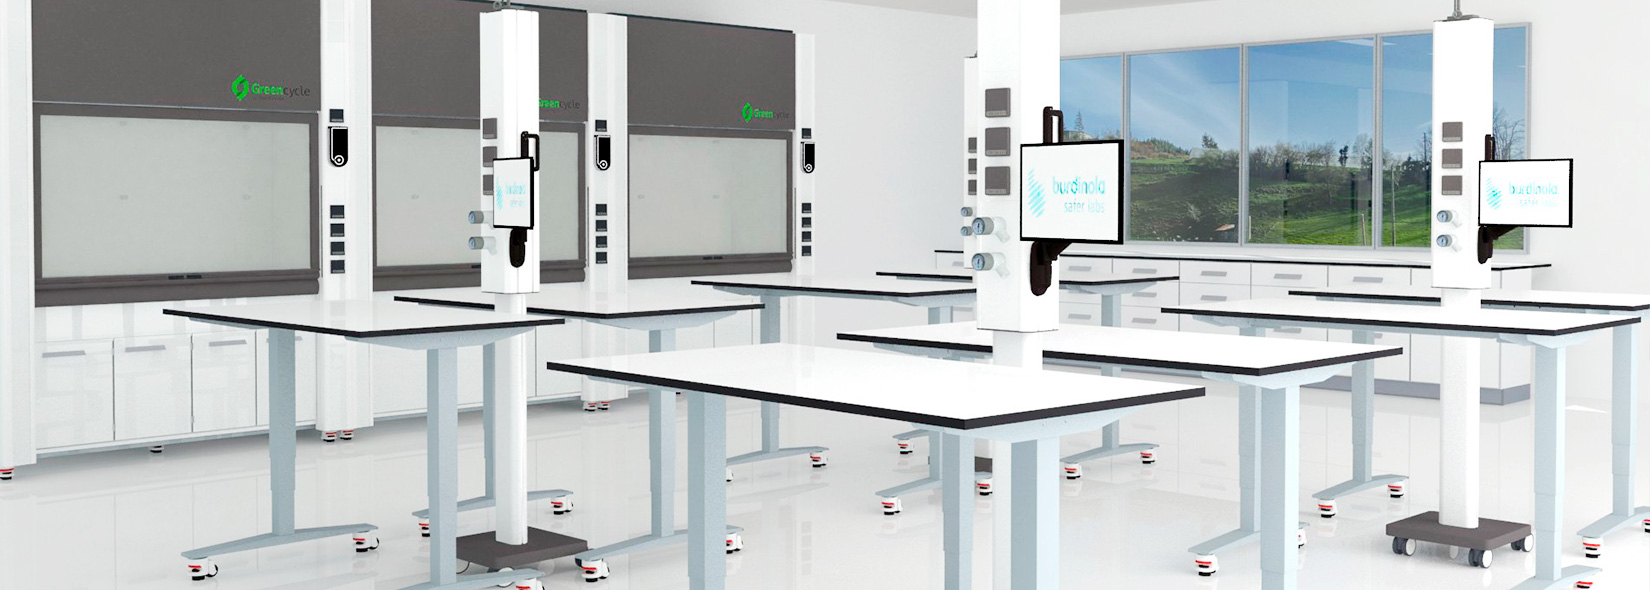 Image of the inside of a laboratory designed by Burdinola with movable recirculating fume cupboards and movable or ceiling-mounted service systems.